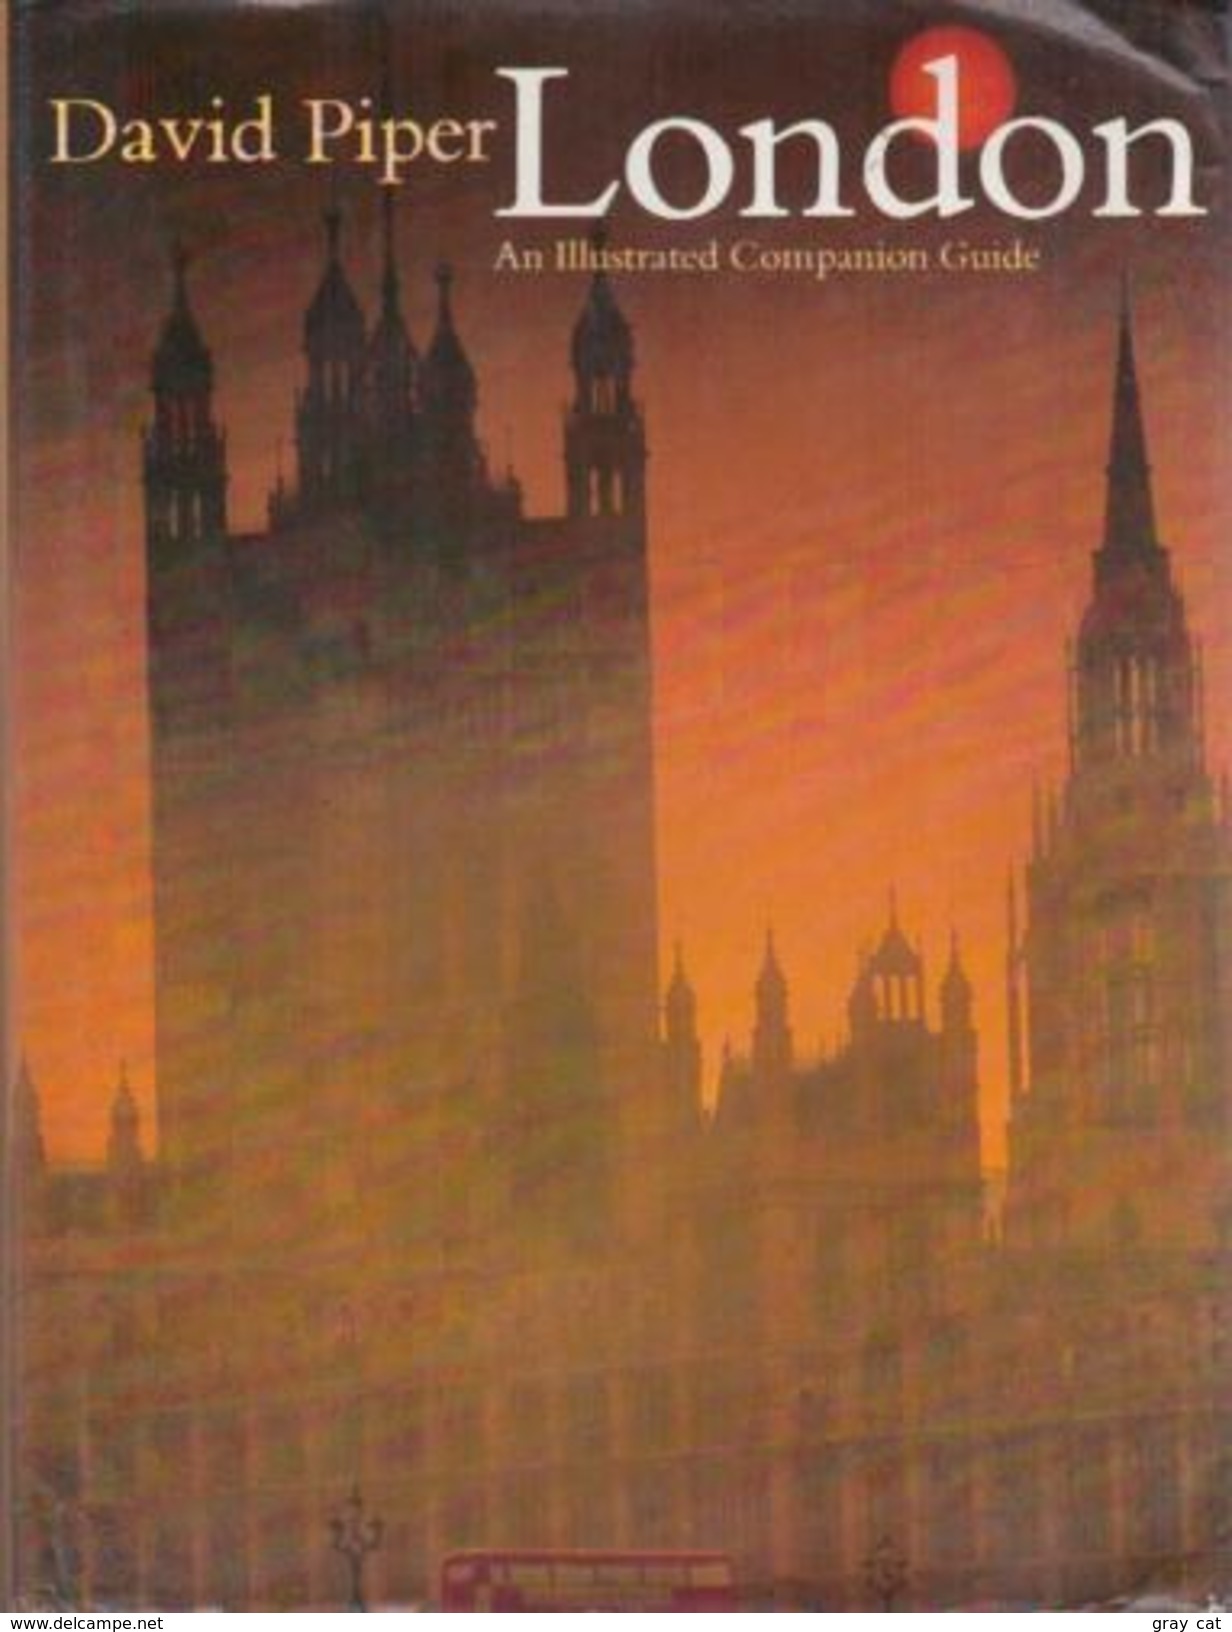 London An Illustrated Companion Guide By Piper, David (ISBN 9780002162876) - Reizen/ Ontdekking